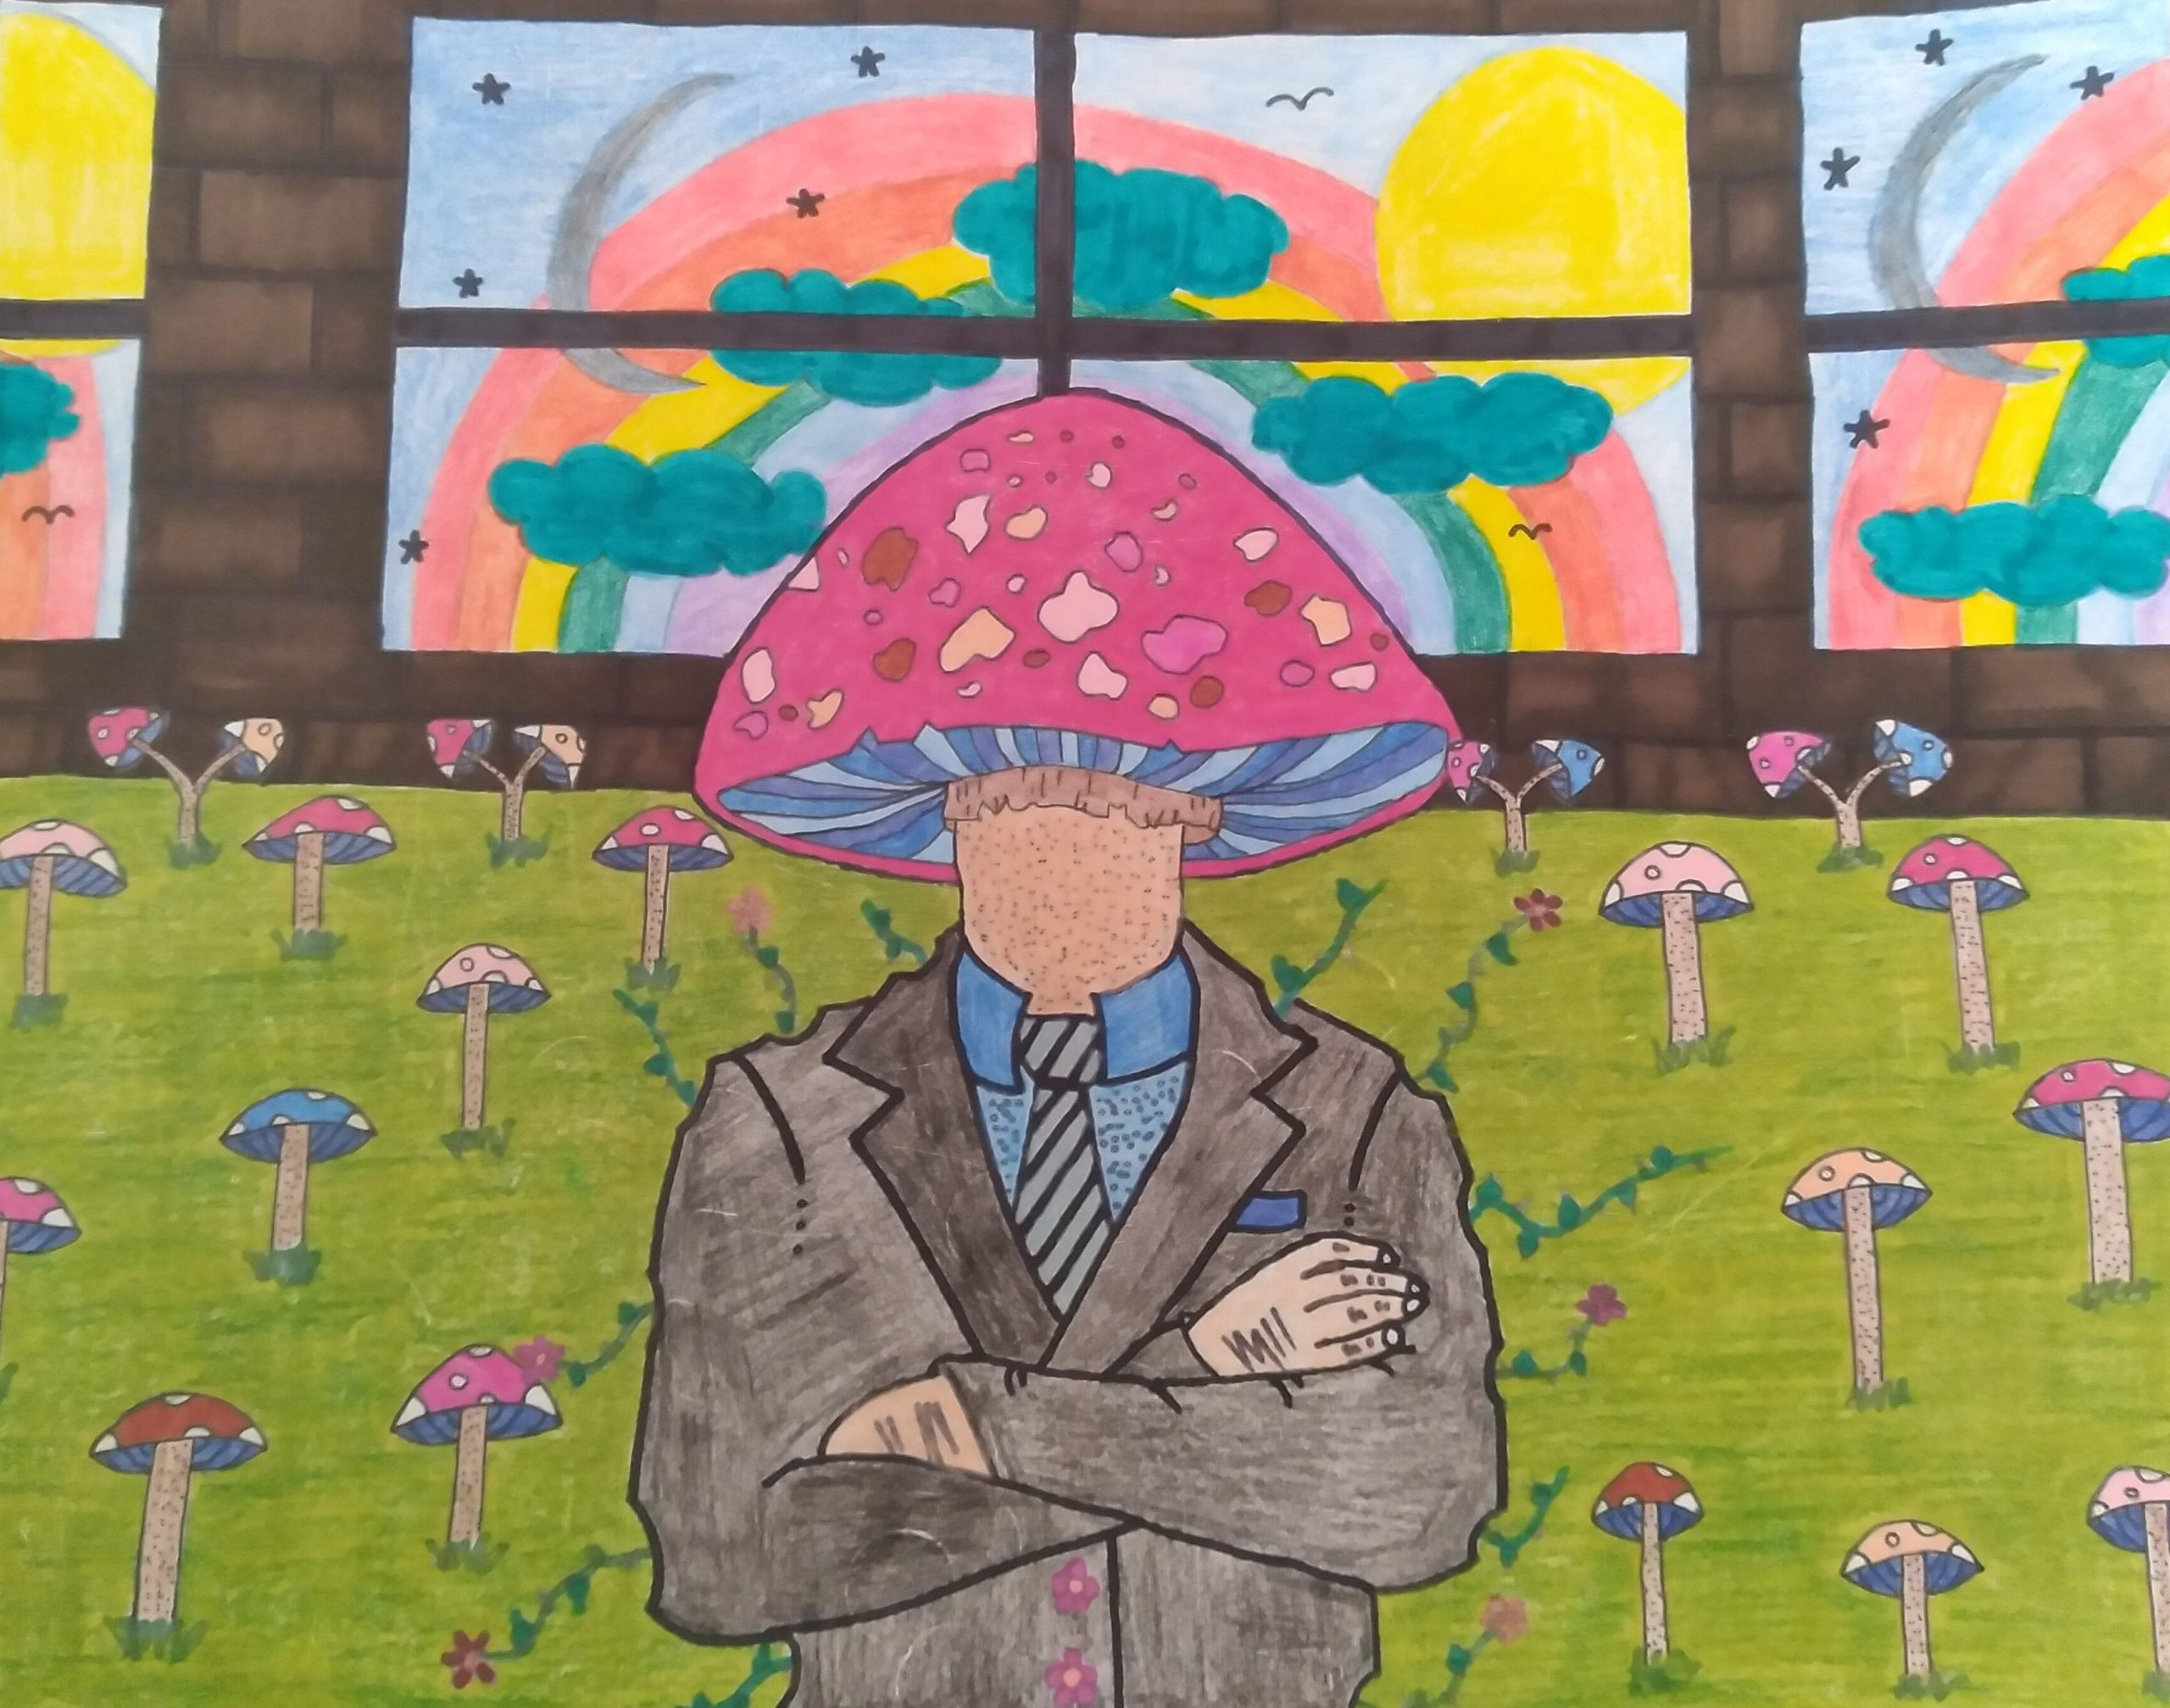 A man in suit with a mushroom head